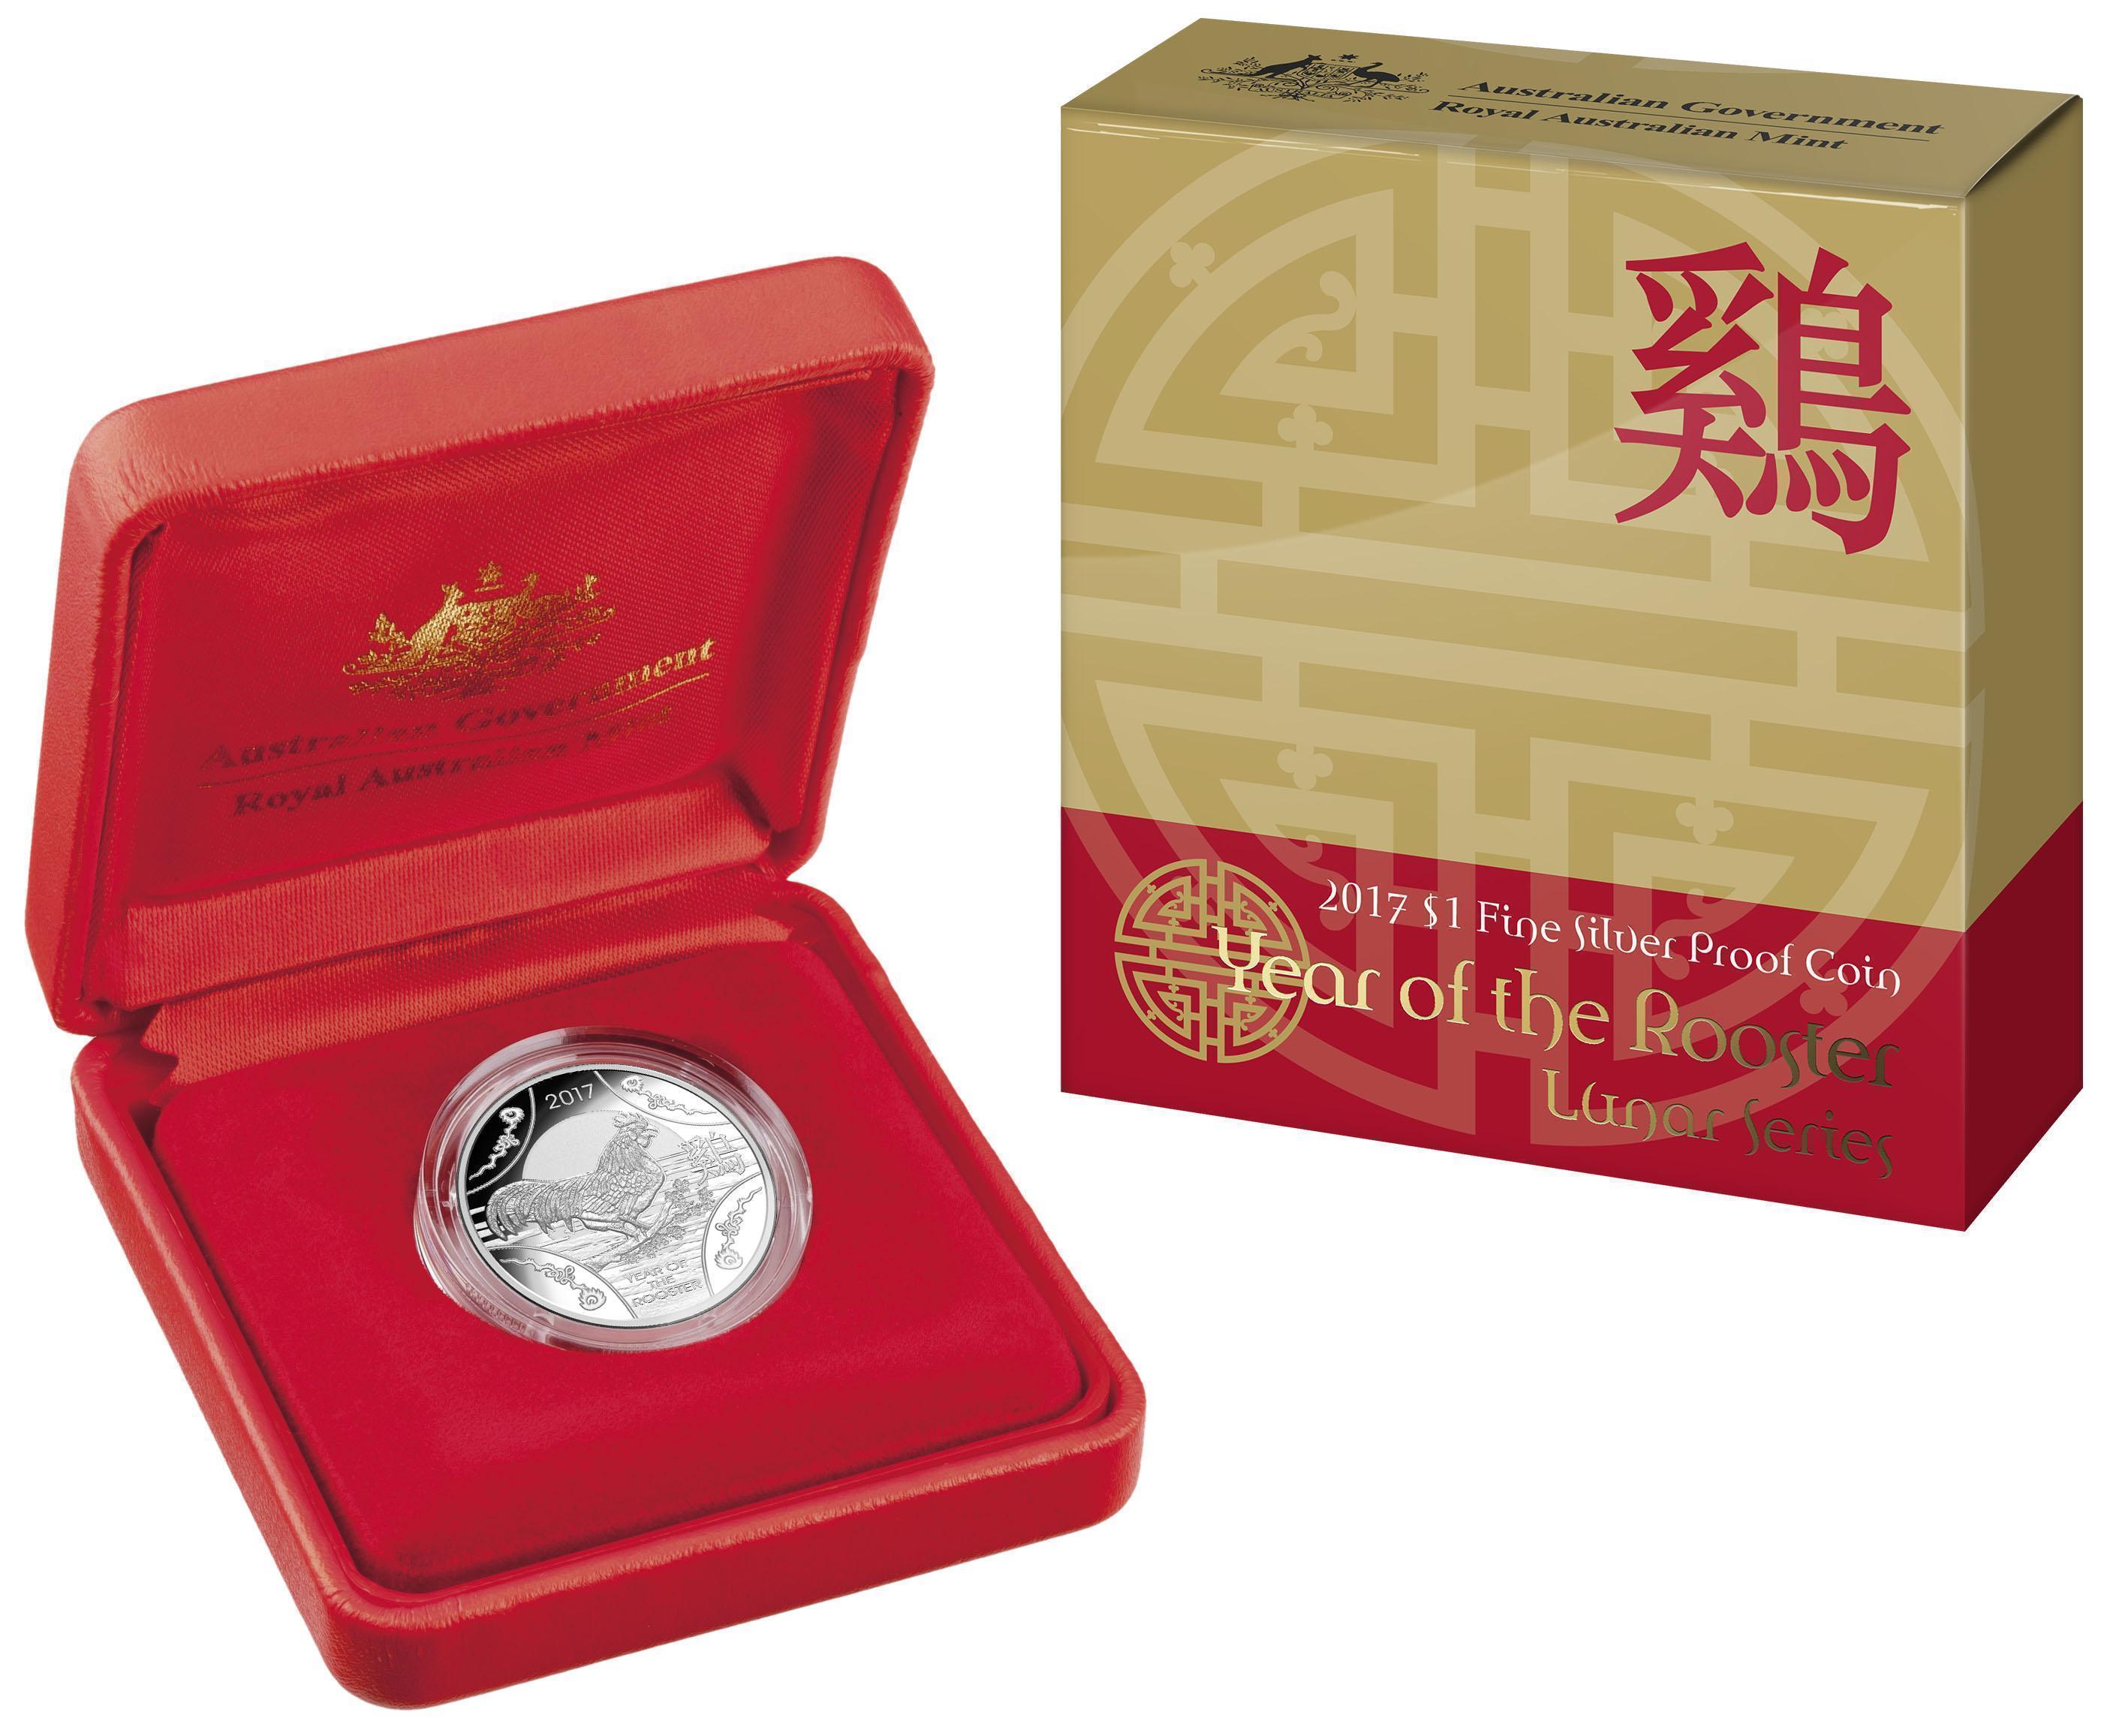 2017 $1 Fine Silver Proof Coin Year of the Rooster Lunar Series Royal Australian Mint RAM